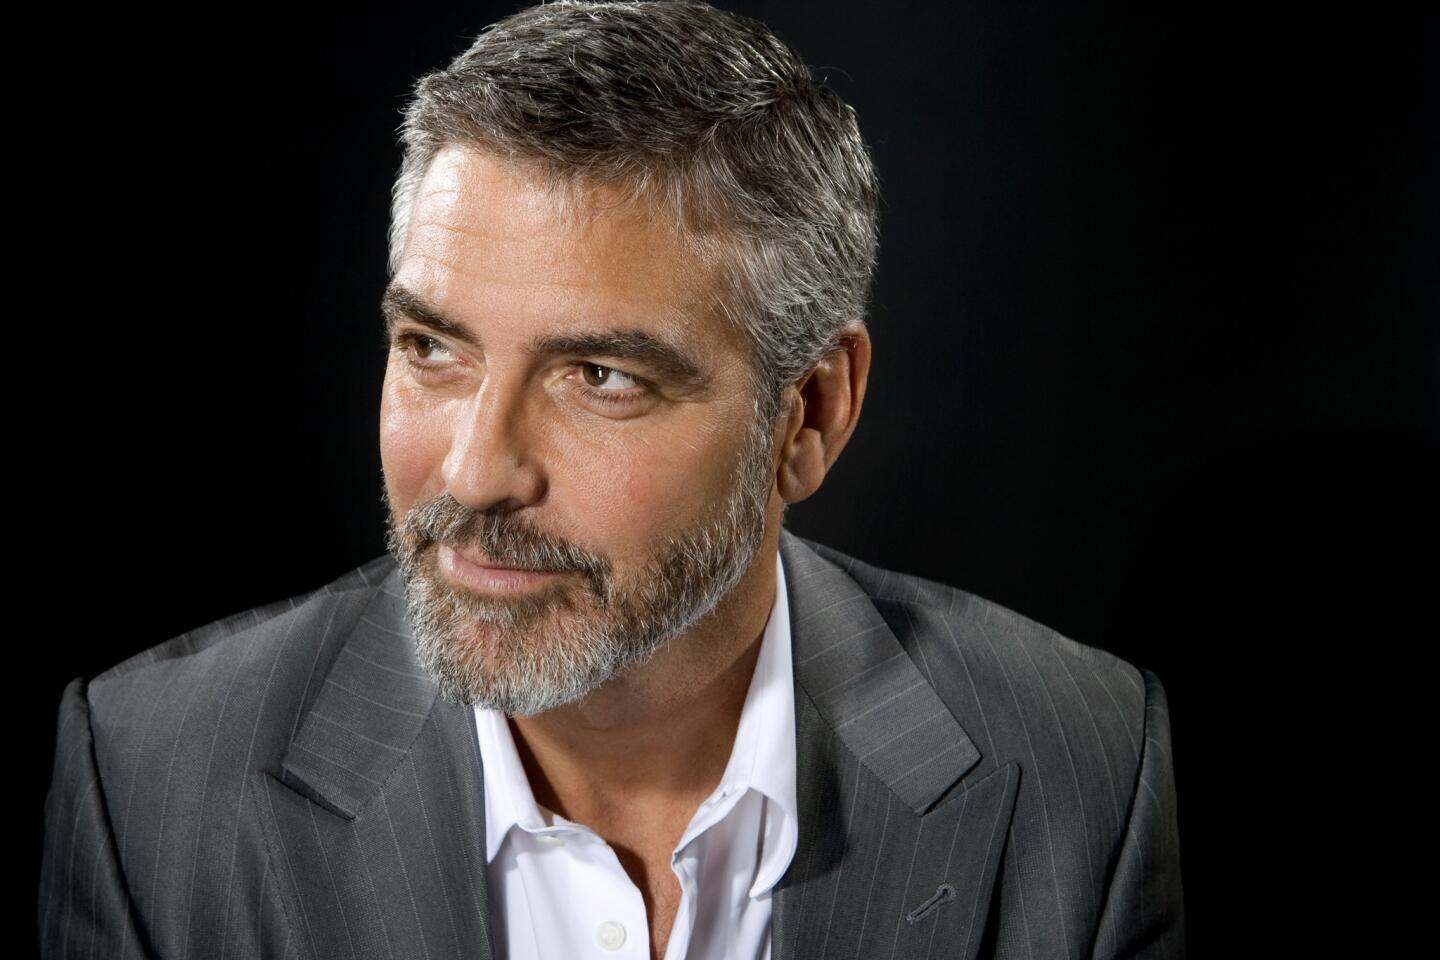 George Clooney. The name says it all: the films, the awards, the looks. We reflect on the actor's career. By Christy Khoshaba